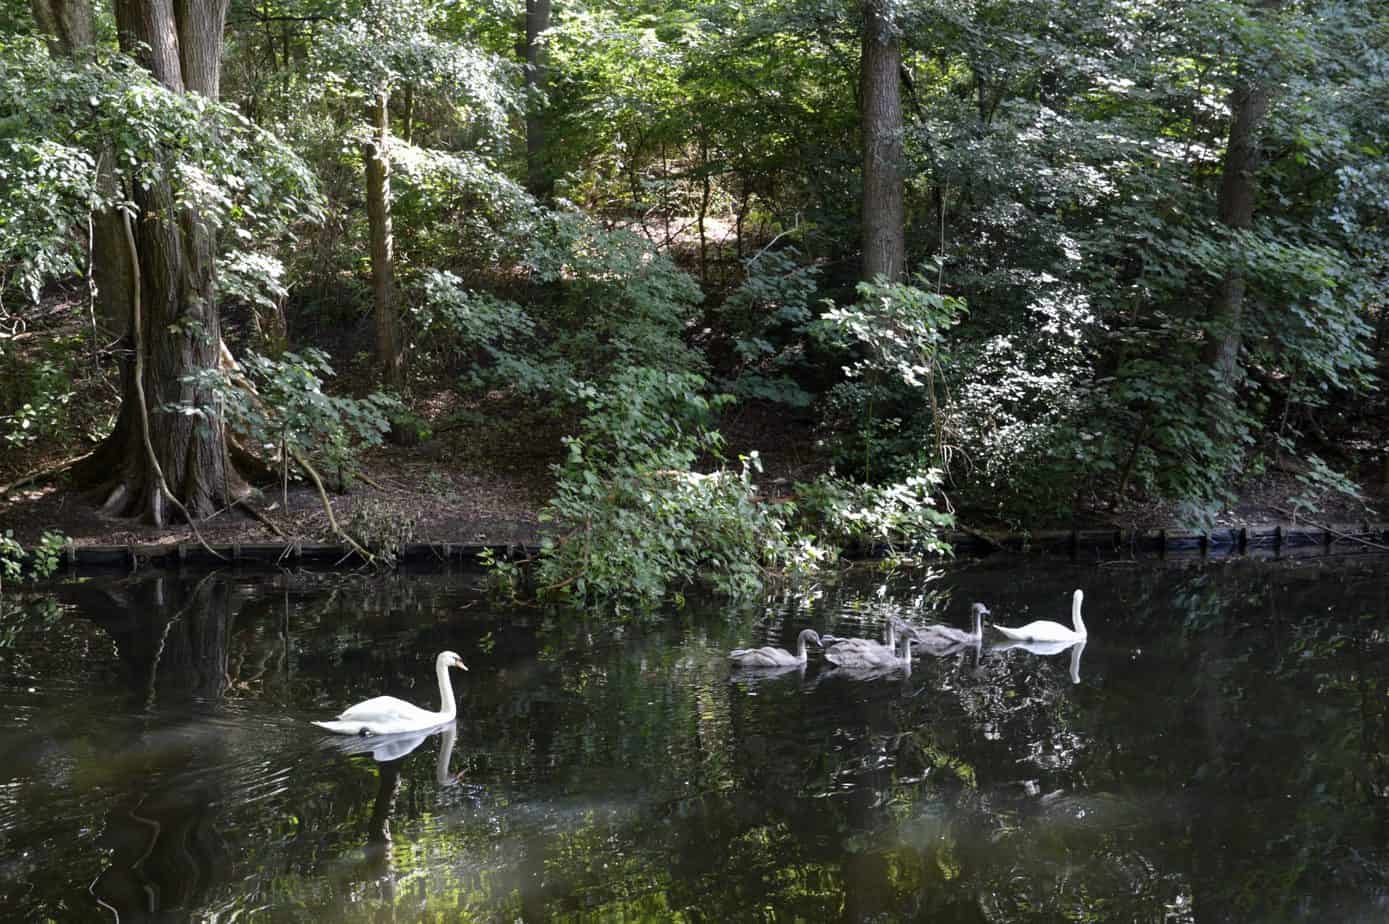 Swans float around on the water with trees behind them.